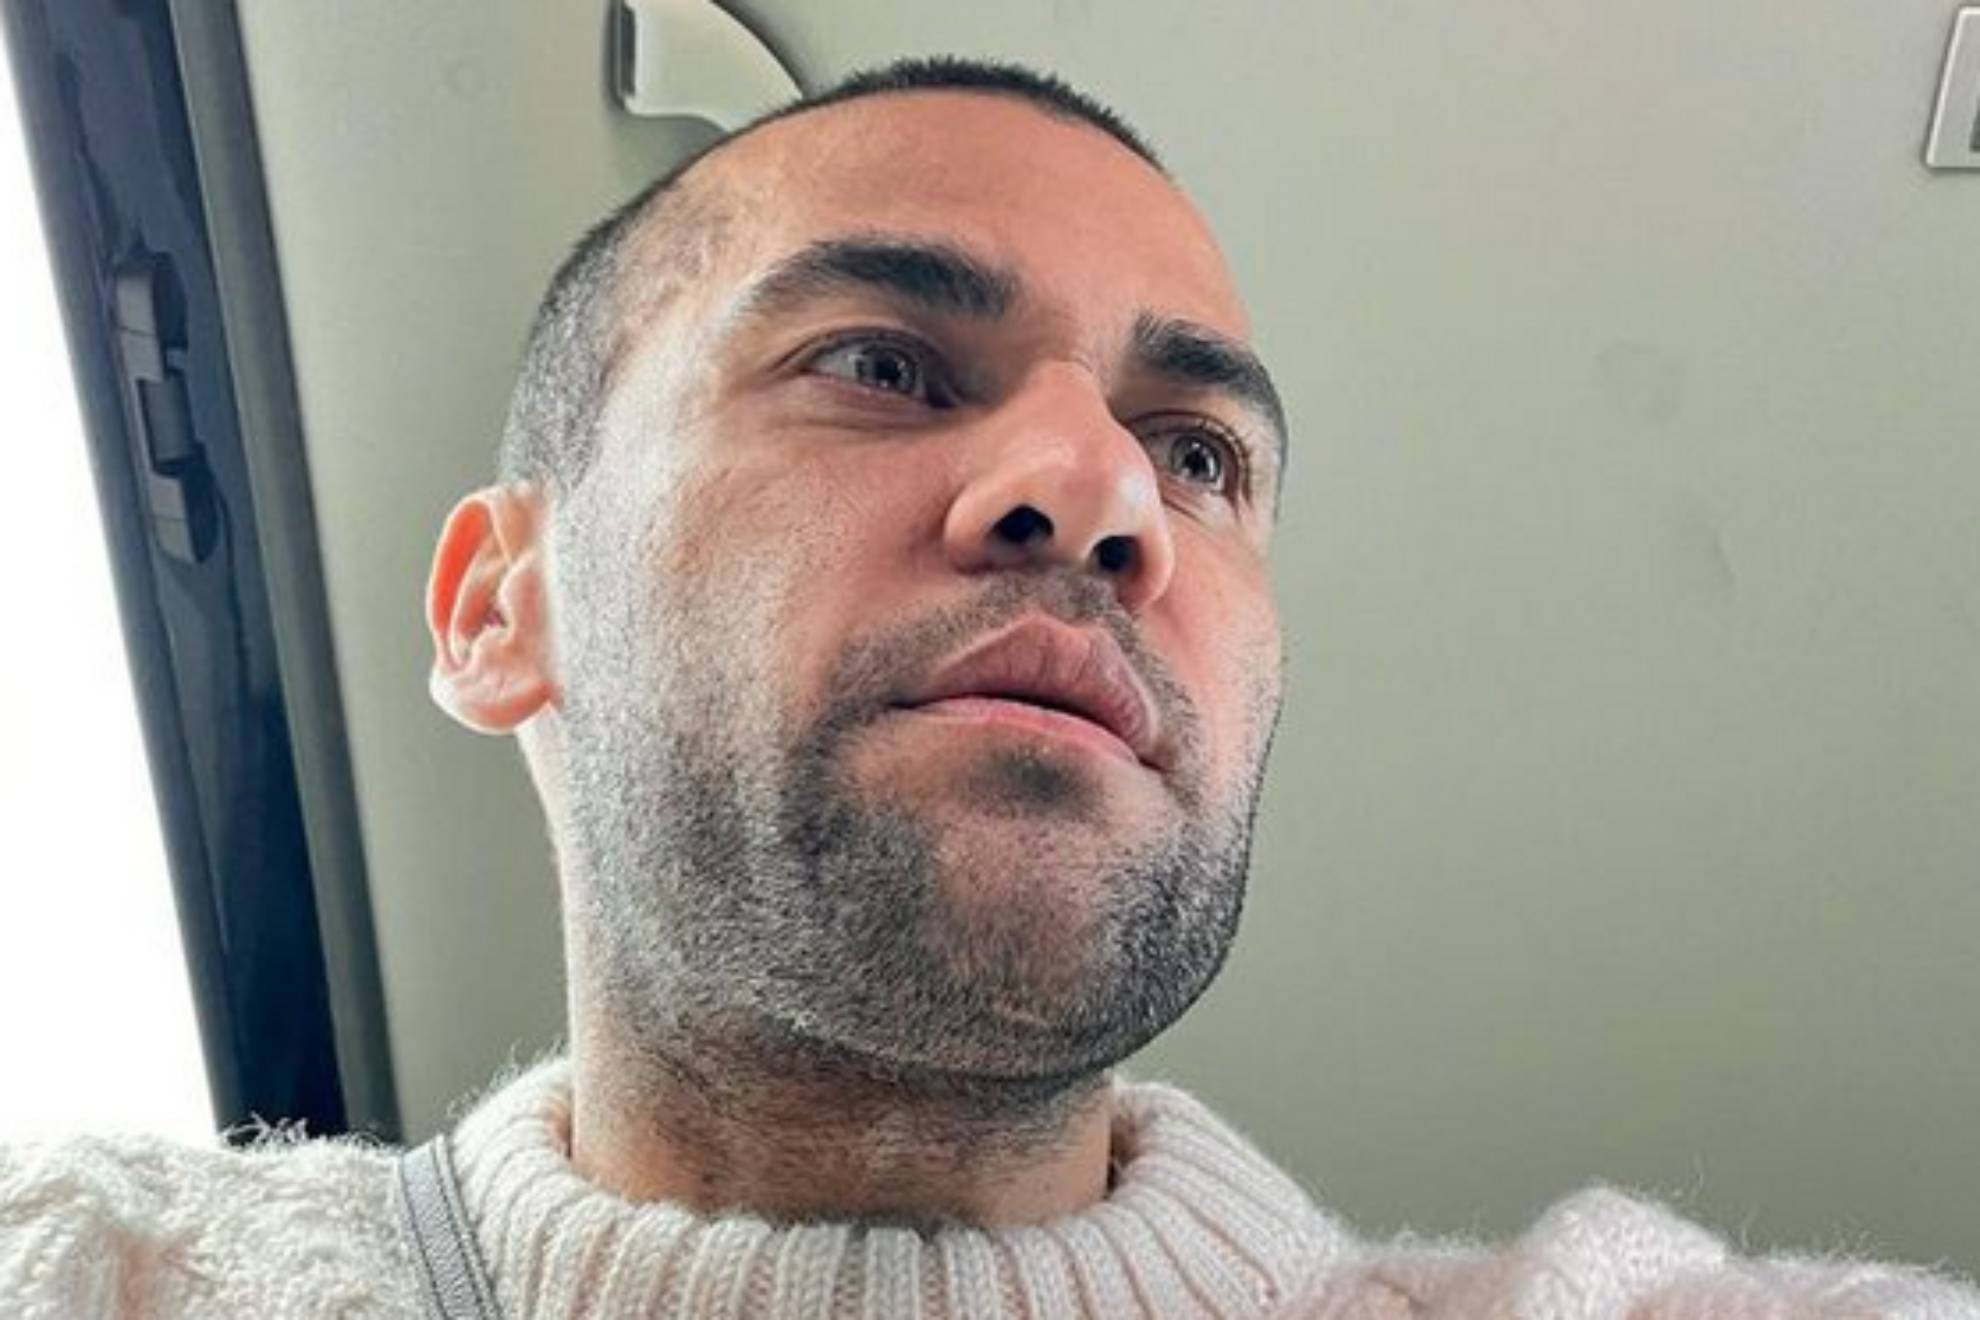 Dani Alves' release on hold: The fear of releasing him is in case he flees